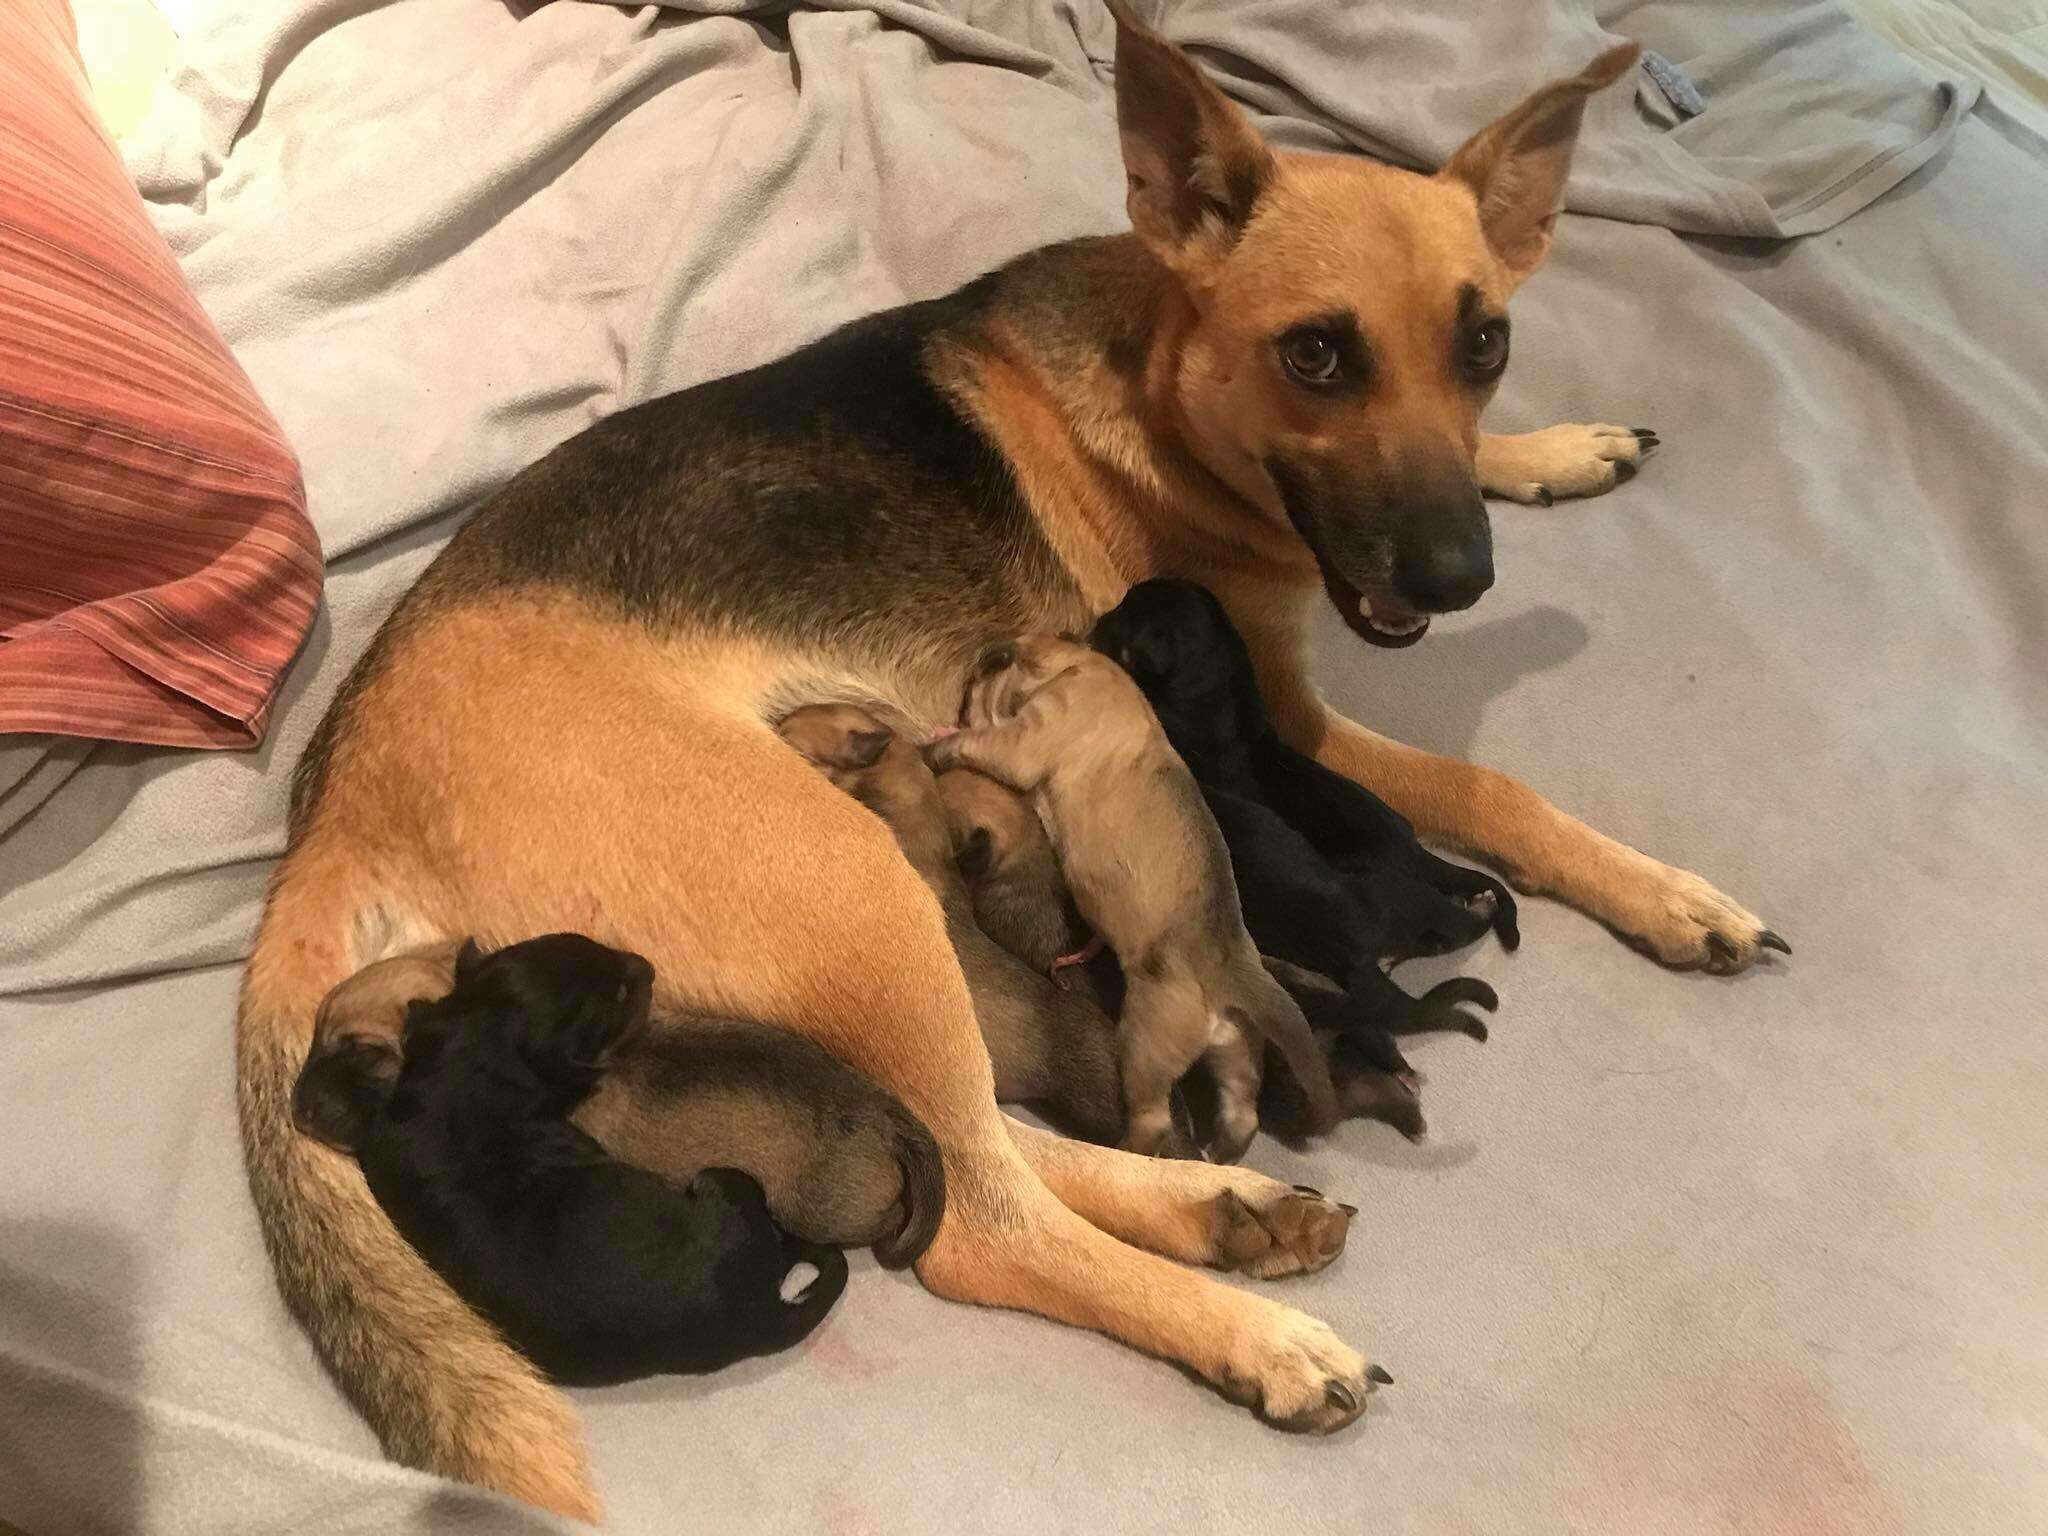 Abandoned dog in Costa Rica at foster carer's home after giving birth